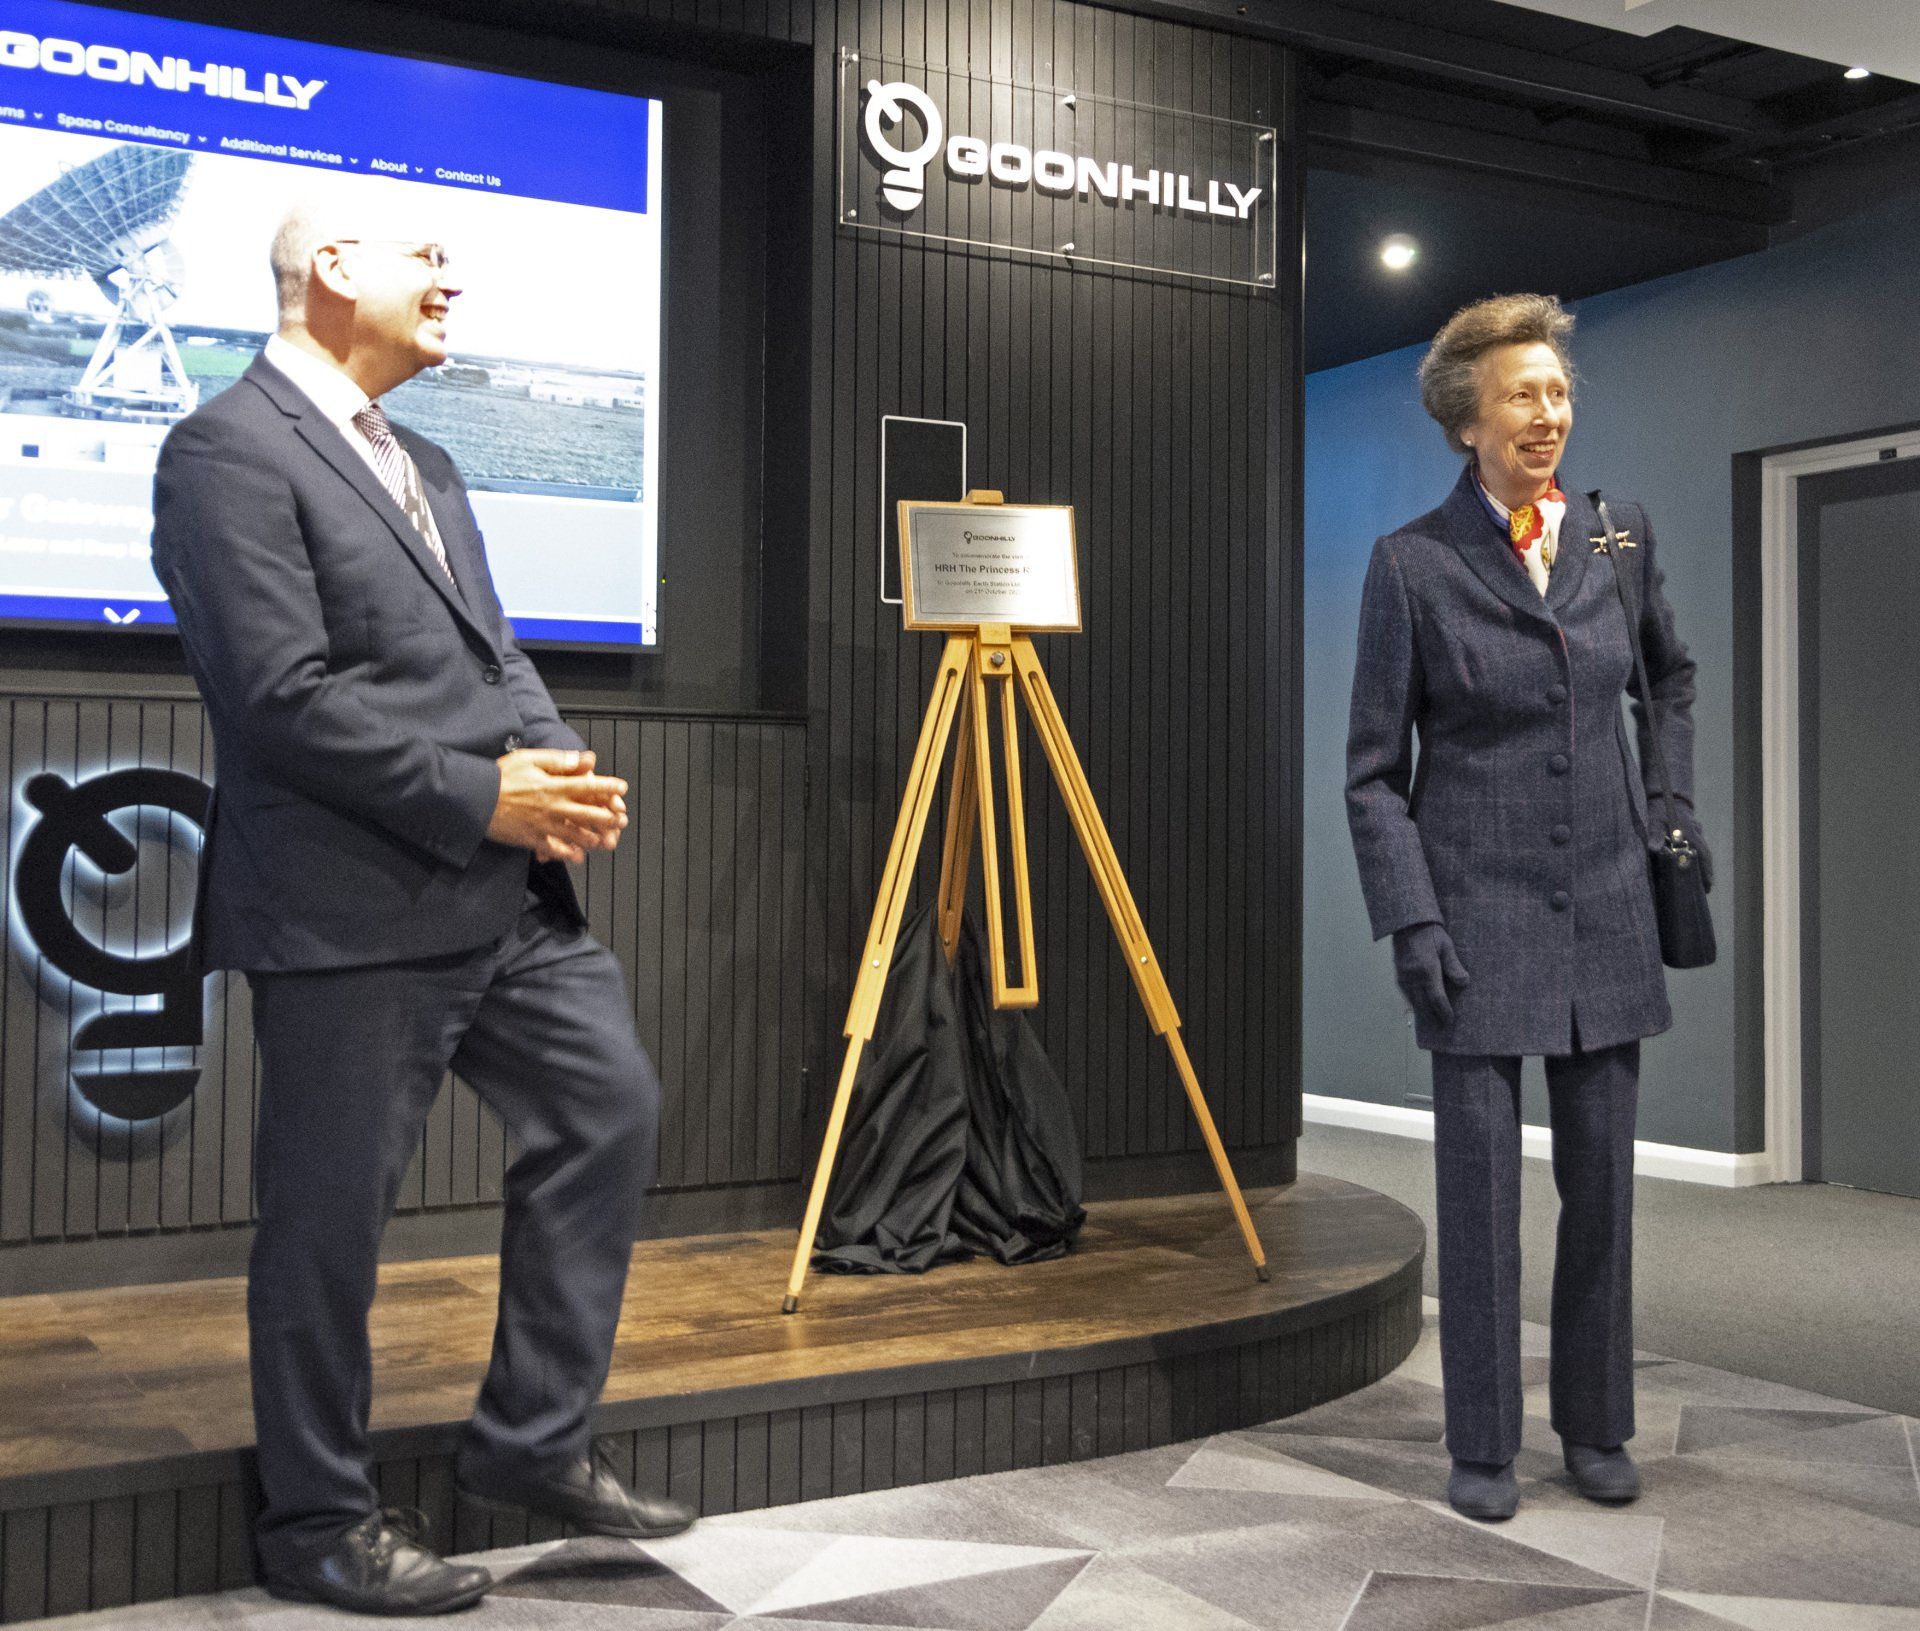 HRH Princess Anne and CEO Ian Jones at the unveiling of a commemorative plaque